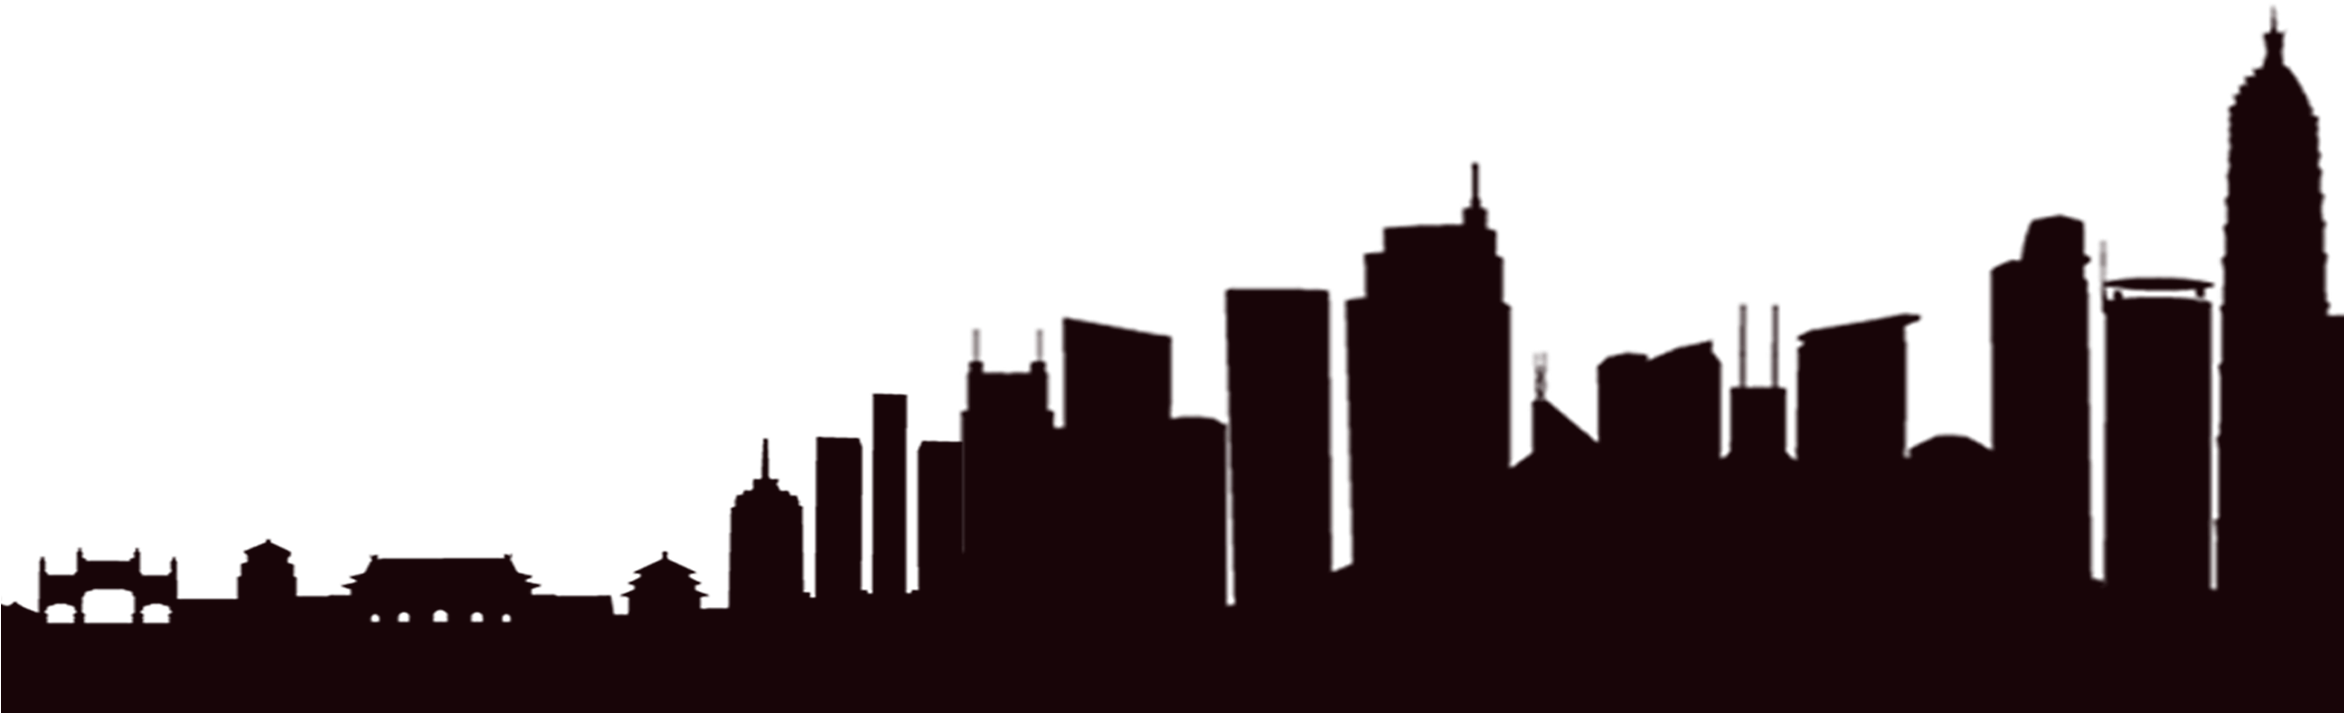 Silhouette Building - Mothers Day Banner Background (2474x753)